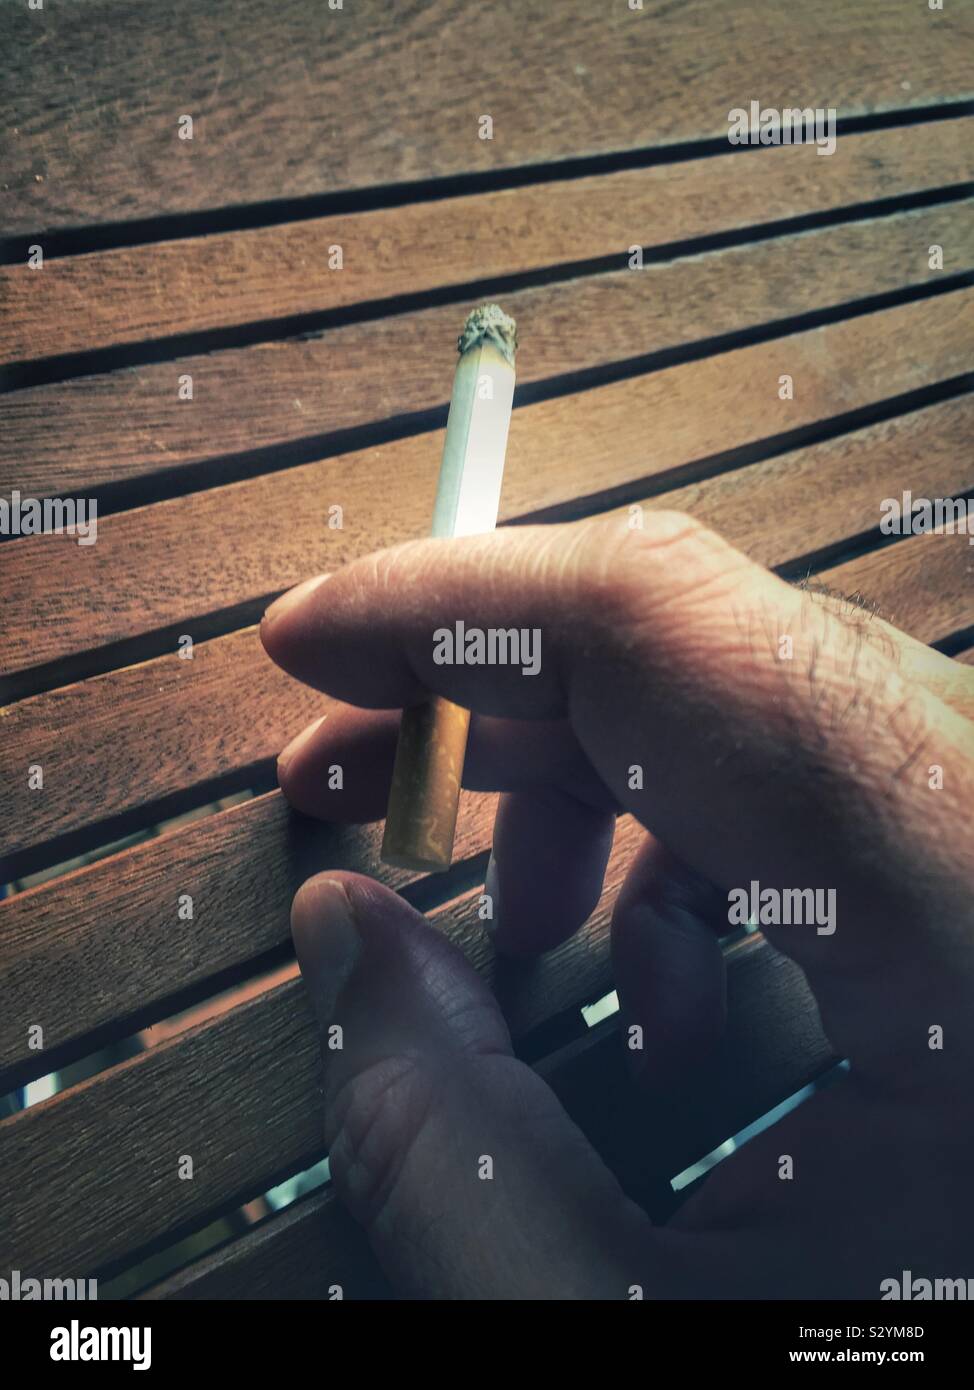 Close up man’s hand holding a cigarette Stock Photo